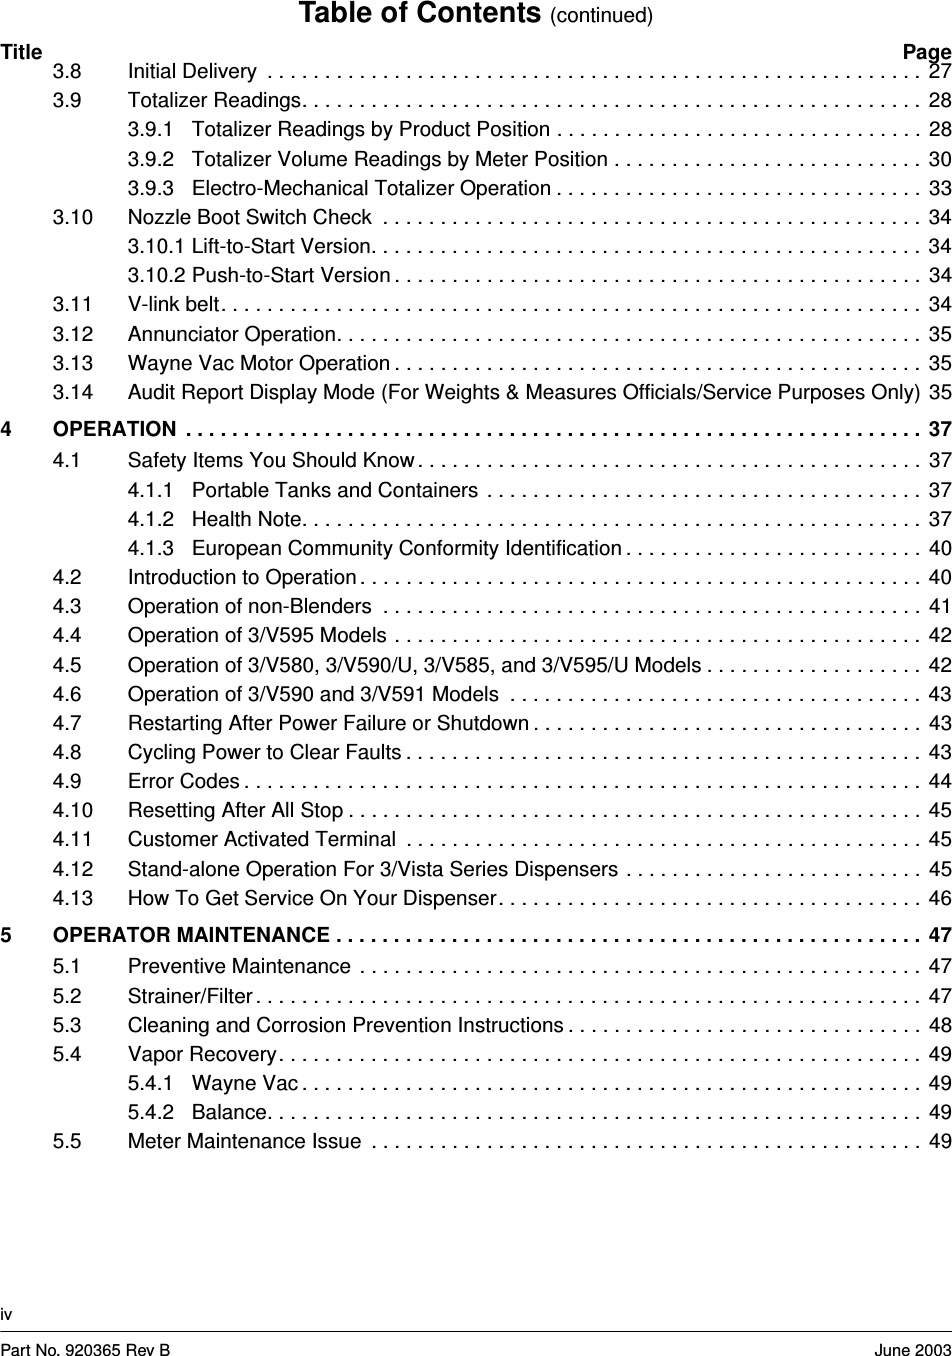 Table of Contents (continued)Title PageivPart No. 920365 Rev B June 20033.8 Initial Delivery  . . . . . . . . . . . . . . . . . . . . . . . . . . . . . . . . . . . . . . . . . . . . . . . . . . . . . . . . .  273.9 Totalizer Readings. . . . . . . . . . . . . . . . . . . . . . . . . . . . . . . . . . . . . . . . . . . . . . . . . . . . . .  283.9.1 Totalizer Readings by Product Position . . . . . . . . . . . . . . . . . . . . . . . . . . . . . . . .  283.9.2 Totalizer Volume Readings by Meter Position . . . . . . . . . . . . . . . . . . . . . . . . . . .  303.9.3 Electro-Mechanical Totalizer Operation . . . . . . . . . . . . . . . . . . . . . . . . . . . . . . . .  333.10 Nozzle Boot Switch Check  . . . . . . . . . . . . . . . . . . . . . . . . . . . . . . . . . . . . . . . . . . . . . . .  343.10.1 Lift-to-Start Version. . . . . . . . . . . . . . . . . . . . . . . . . . . . . . . . . . . . . . . . . . . . . . . .  343.10.2 Push-to-Start Version . . . . . . . . . . . . . . . . . . . . . . . . . . . . . . . . . . . . . . . . . . . . . .  343.11 V-link belt. . . . . . . . . . . . . . . . . . . . . . . . . . . . . . . . . . . . . . . . . . . . . . . . . . . . . . . . . . . . .  343.12 Annunciator Operation. . . . . . . . . . . . . . . . . . . . . . . . . . . . . . . . . . . . . . . . . . . . . . . . . . .  353.13 Wayne Vac Motor Operation . . . . . . . . . . . . . . . . . . . . . . . . . . . . . . . . . . . . . . . . . . . . . .  353.14 Audit Report Display Mode (For Weights &amp; Measures Officials/Service Purposes Only) 354 OPERATION  . . . . . . . . . . . . . . . . . . . . . . . . . . . . . . . . . . . . . . . . . . . . . . . . . . . . . . . . . . . . . . . .  374.1 Safety Items You Should Know . . . . . . . . . . . . . . . . . . . . . . . . . . . . . . . . . . . . . . . . . . . .  374.1.1 Portable Tanks and Containers  . . . . . . . . . . . . . . . . . . . . . . . . . . . . . . . . . . . . . .  374.1.2 Health Note. . . . . . . . . . . . . . . . . . . . . . . . . . . . . . . . . . . . . . . . . . . . . . . . . . . . . .  374.1.3 European Community Conformity Identification . . . . . . . . . . . . . . . . . . . . . . . . . .  404.2 Introduction to Operation . . . . . . . . . . . . . . . . . . . . . . . . . . . . . . . . . . . . . . . . . . . . . . . . .  404.3 Operation of non-Blenders  . . . . . . . . . . . . . . . . . . . . . . . . . . . . . . . . . . . . . . . . . . . . . . .  414.4 Operation of 3/V595 Models . . . . . . . . . . . . . . . . . . . . . . . . . . . . . . . . . . . . . . . . . . . . . .  424.5 Operation of 3/V580, 3/V590/U, 3/V585, and 3/V595/U Models . . . . . . . . . . . . . . . . . . .  424.6 Operation of 3/V590 and 3/V591 Models  . . . . . . . . . . . . . . . . . . . . . . . . . . . . . . . . . . . .  434.7 Restarting After Power Failure or Shutdown . . . . . . . . . . . . . . . . . . . . . . . . . . . . . . . . . .  434.8 Cycling Power to Clear Faults . . . . . . . . . . . . . . . . . . . . . . . . . . . . . . . . . . . . . . . . . . . . .  434.9 Error Codes . . . . . . . . . . . . . . . . . . . . . . . . . . . . . . . . . . . . . . . . . . . . . . . . . . . . . . . . . . .  444.10 Resetting After All Stop . . . . . . . . . . . . . . . . . . . . . . . . . . . . . . . . . . . . . . . . . . . . . . . . . .  454.11 Customer Activated Terminal  . . . . . . . . . . . . . . . . . . . . . . . . . . . . . . . . . . . . . . . . . . . . .  454.12 Stand-alone Operation For 3/Vista Series Dispensers . . . . . . . . . . . . . . . . . . . . . . . . . .  454.13 How To Get Service On Your Dispenser. . . . . . . . . . . . . . . . . . . . . . . . . . . . . . . . . . . . .  465 OPERATOR MAINTENANCE . . . . . . . . . . . . . . . . . . . . . . . . . . . . . . . . . . . . . . . . . . . . . . . . . . .  475.1 Preventive Maintenance  . . . . . . . . . . . . . . . . . . . . . . . . . . . . . . . . . . . . . . . . . . . . . . . . .  475.2 Strainer/Filter . . . . . . . . . . . . . . . . . . . . . . . . . . . . . . . . . . . . . . . . . . . . . . . . . . . . . . . . . .  475.3 Cleaning and Corrosion Prevention Instructions . . . . . . . . . . . . . . . . . . . . . . . . . . . . . . .  485.4 Vapor Recovery. . . . . . . . . . . . . . . . . . . . . . . . . . . . . . . . . . . . . . . . . . . . . . . . . . . . . . . .  495.4.1 Wayne Vac . . . . . . . . . . . . . . . . . . . . . . . . . . . . . . . . . . . . . . . . . . . . . . . . . . . . . .  495.4.2 Balance. . . . . . . . . . . . . . . . . . . . . . . . . . . . . . . . . . . . . . . . . . . . . . . . . . . . . . . . .  495.5 Meter Maintenance Issue  . . . . . . . . . . . . . . . . . . . . . . . . . . . . . . . . . . . . . . . . . . . . . . . .  49